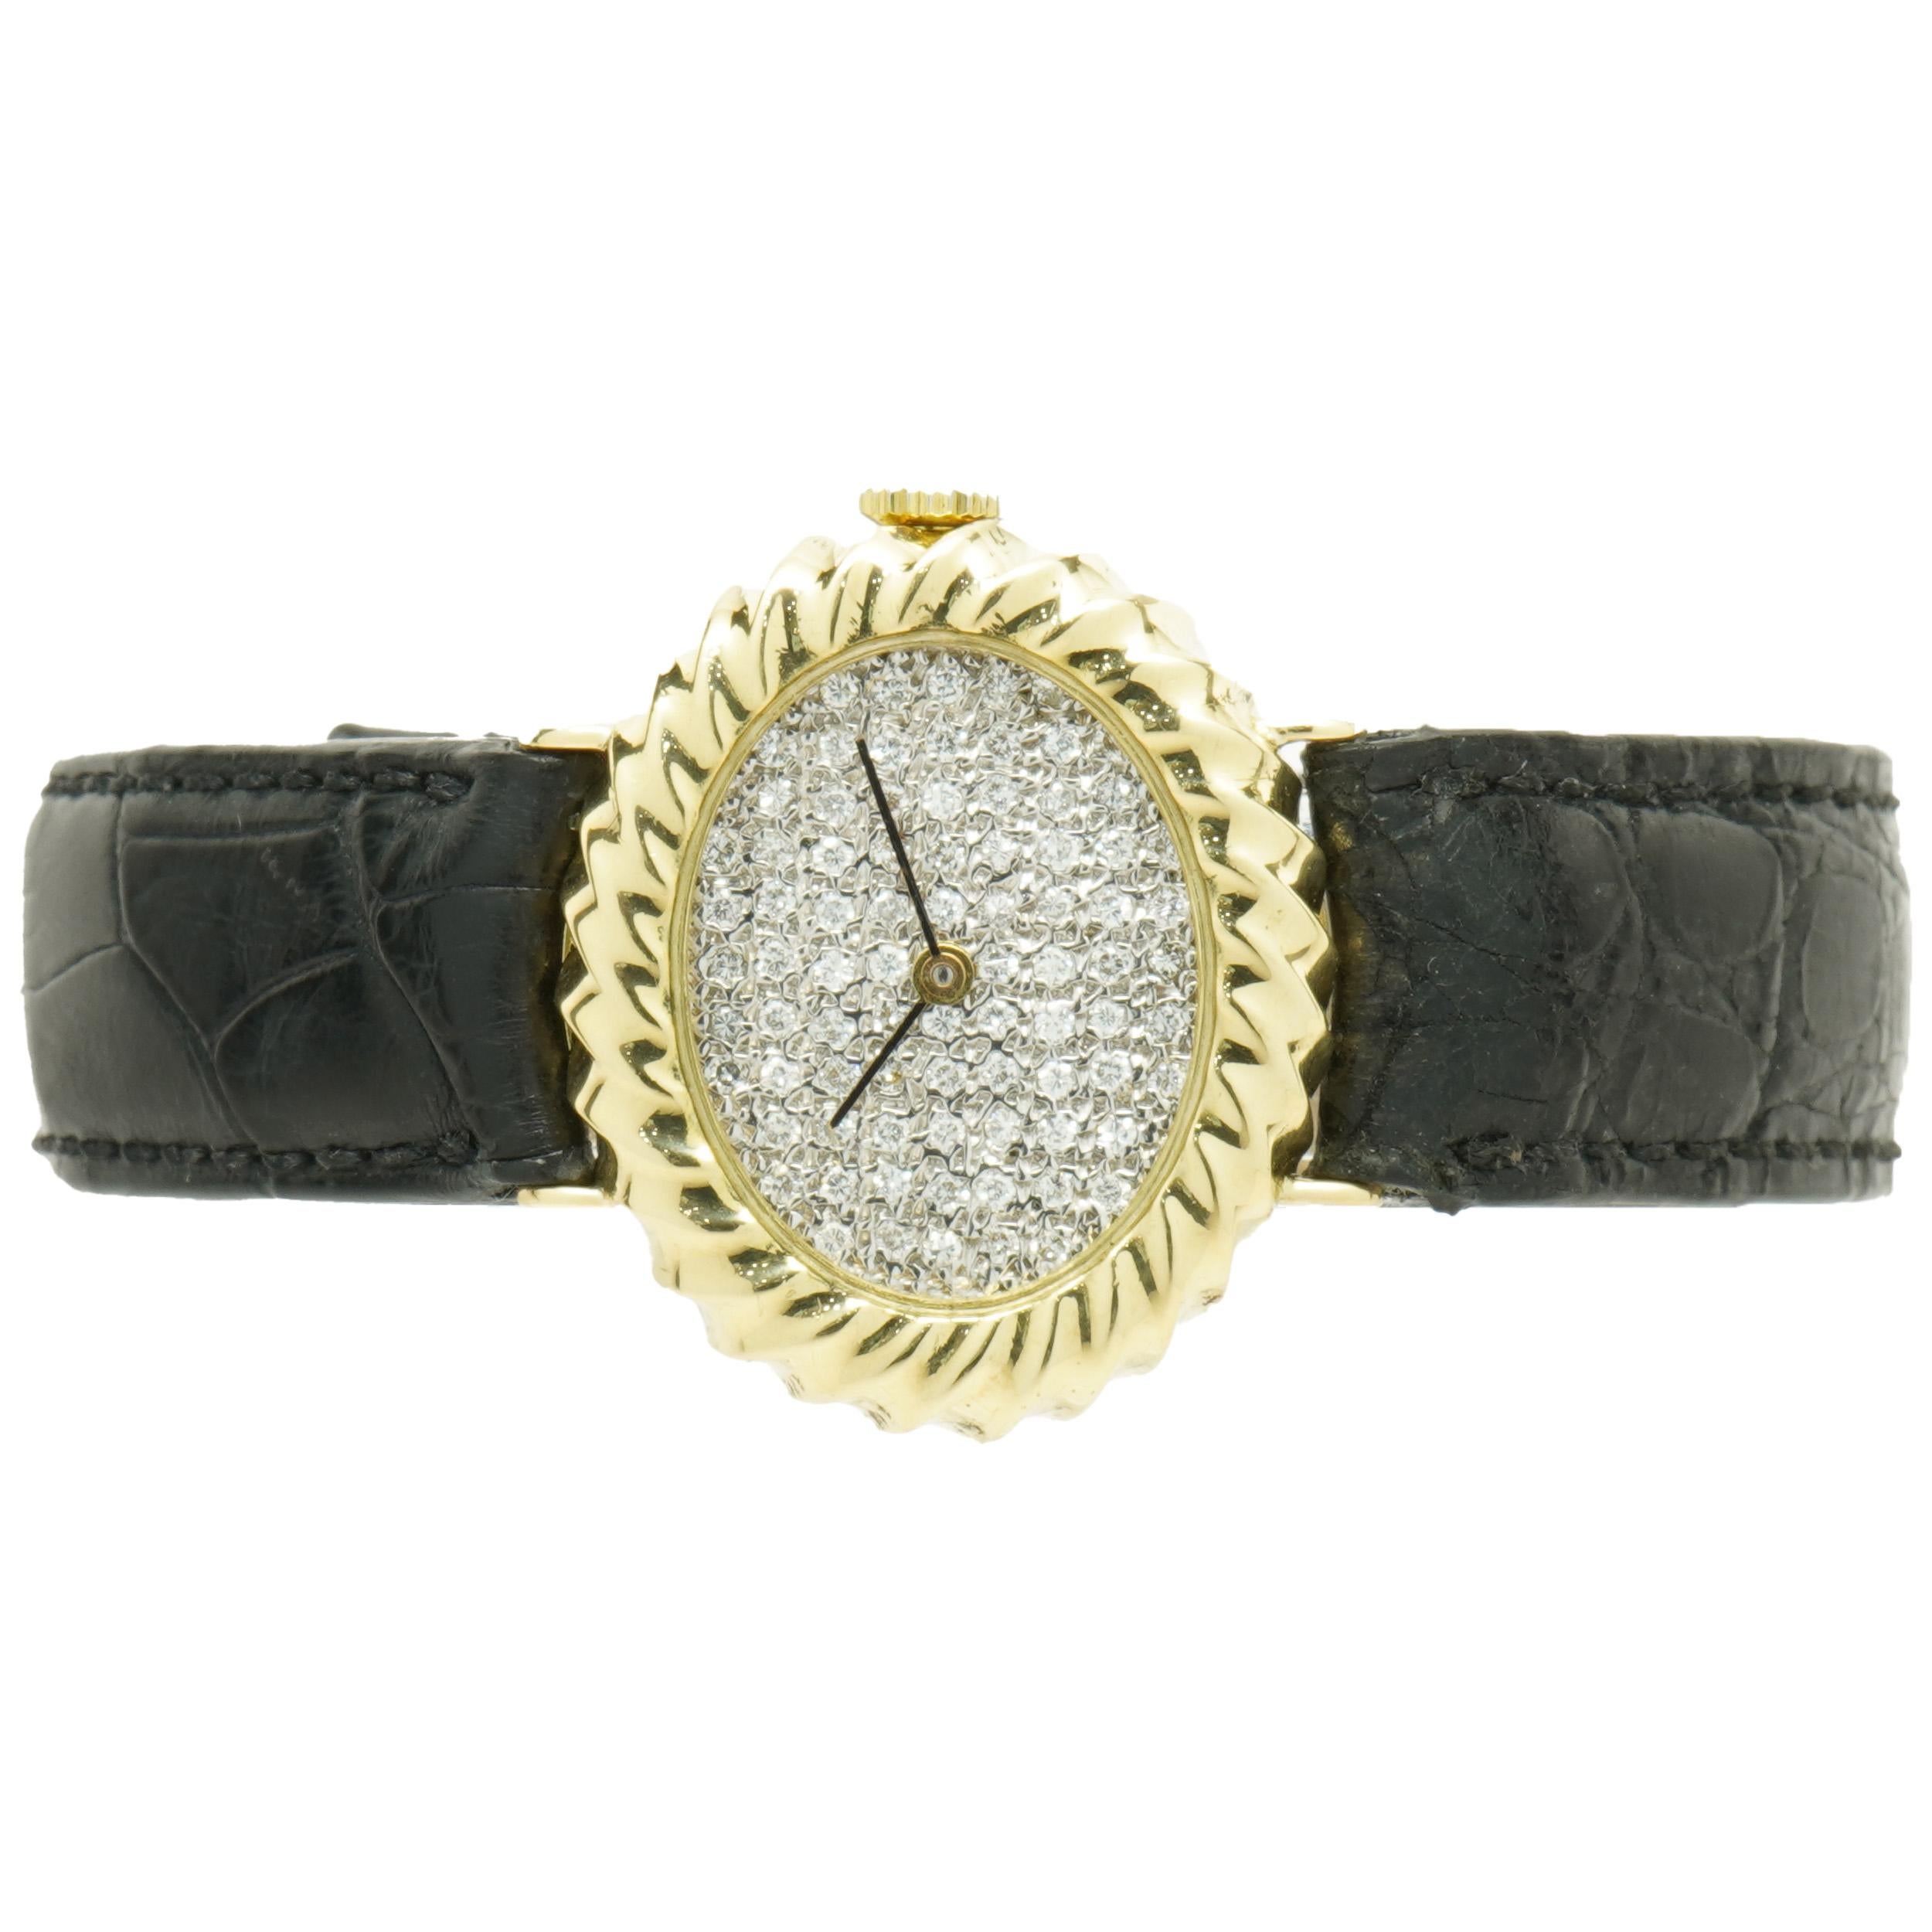 Movement: Manual wind
Function: hours, minutes
Case: 33 x 24.5mm oval case, sapphire crystal, 18K yellow gold cable bezel 
Band: black leather strap, buckle
Dial: pave diamond
Does not come with original box or paperwork.
Guaranteed to be authentic